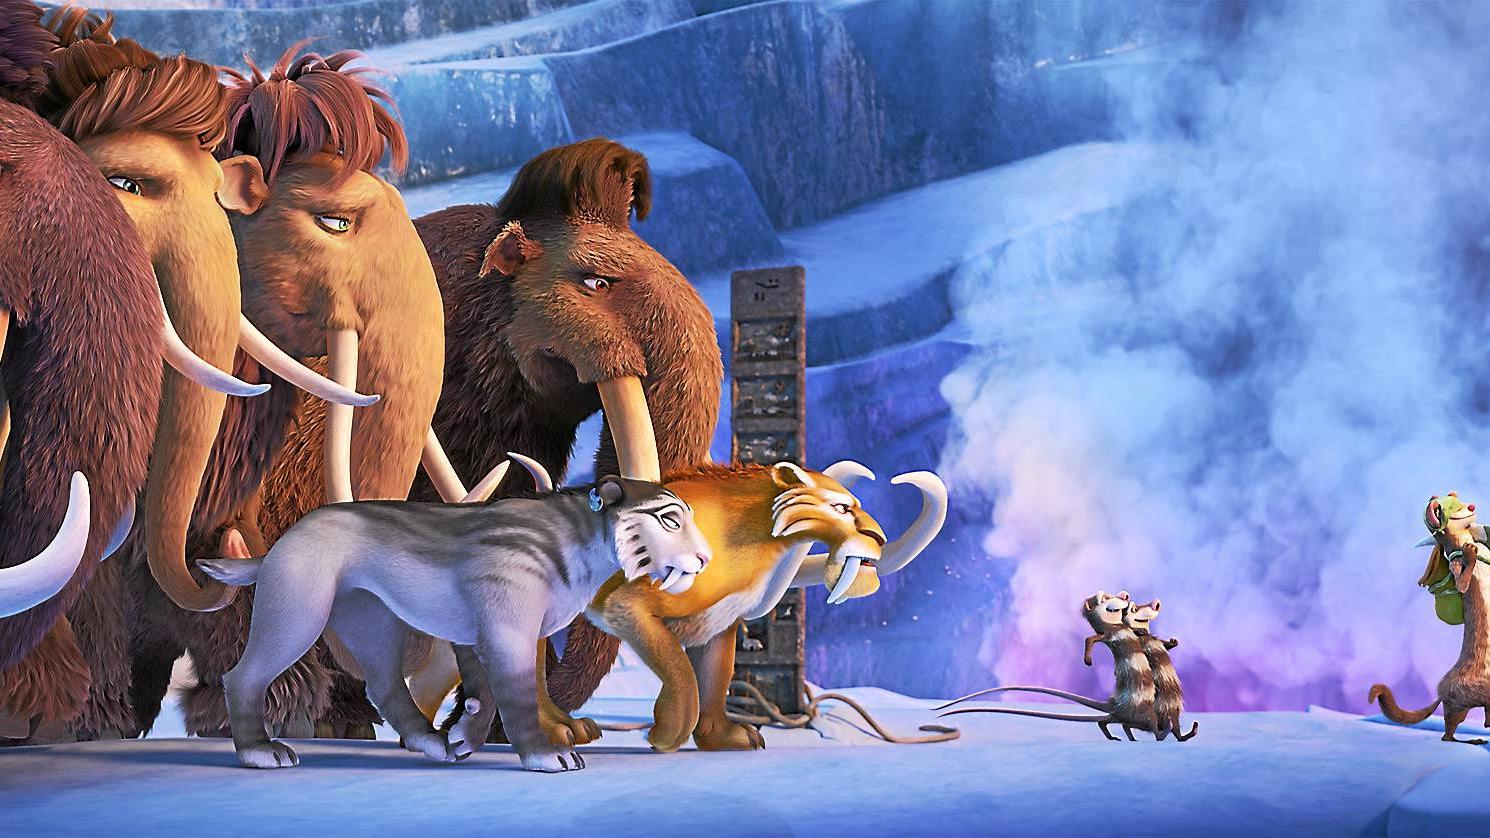 The company behind Ice Age, Blue Sky, is being shut down. (Image: Blue Sky)